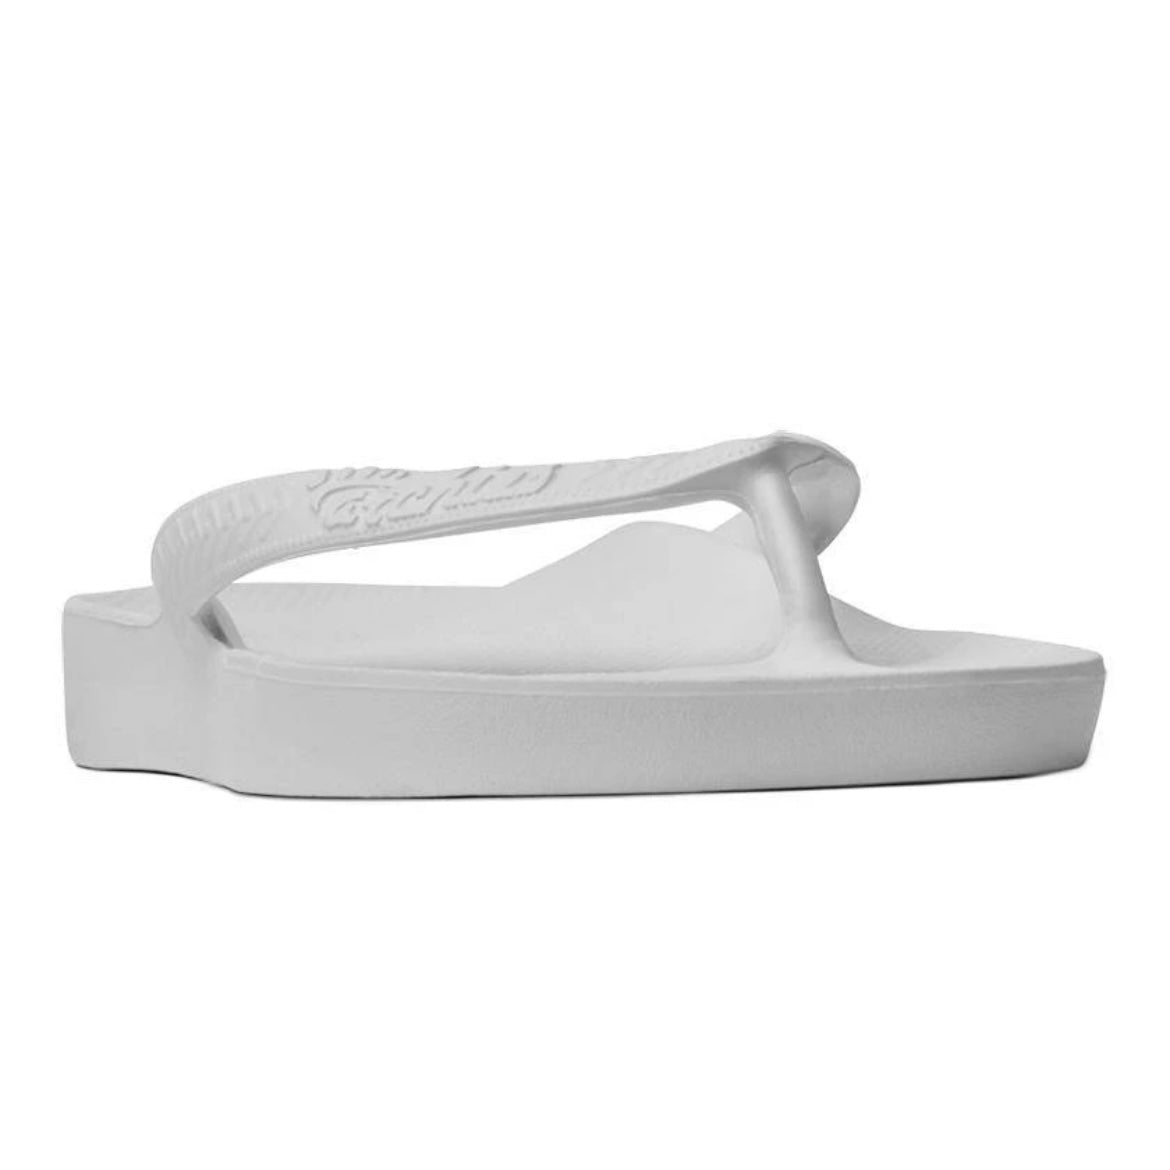 ARCHIES ARCH SUPPORT UNISEX THONG WHITE